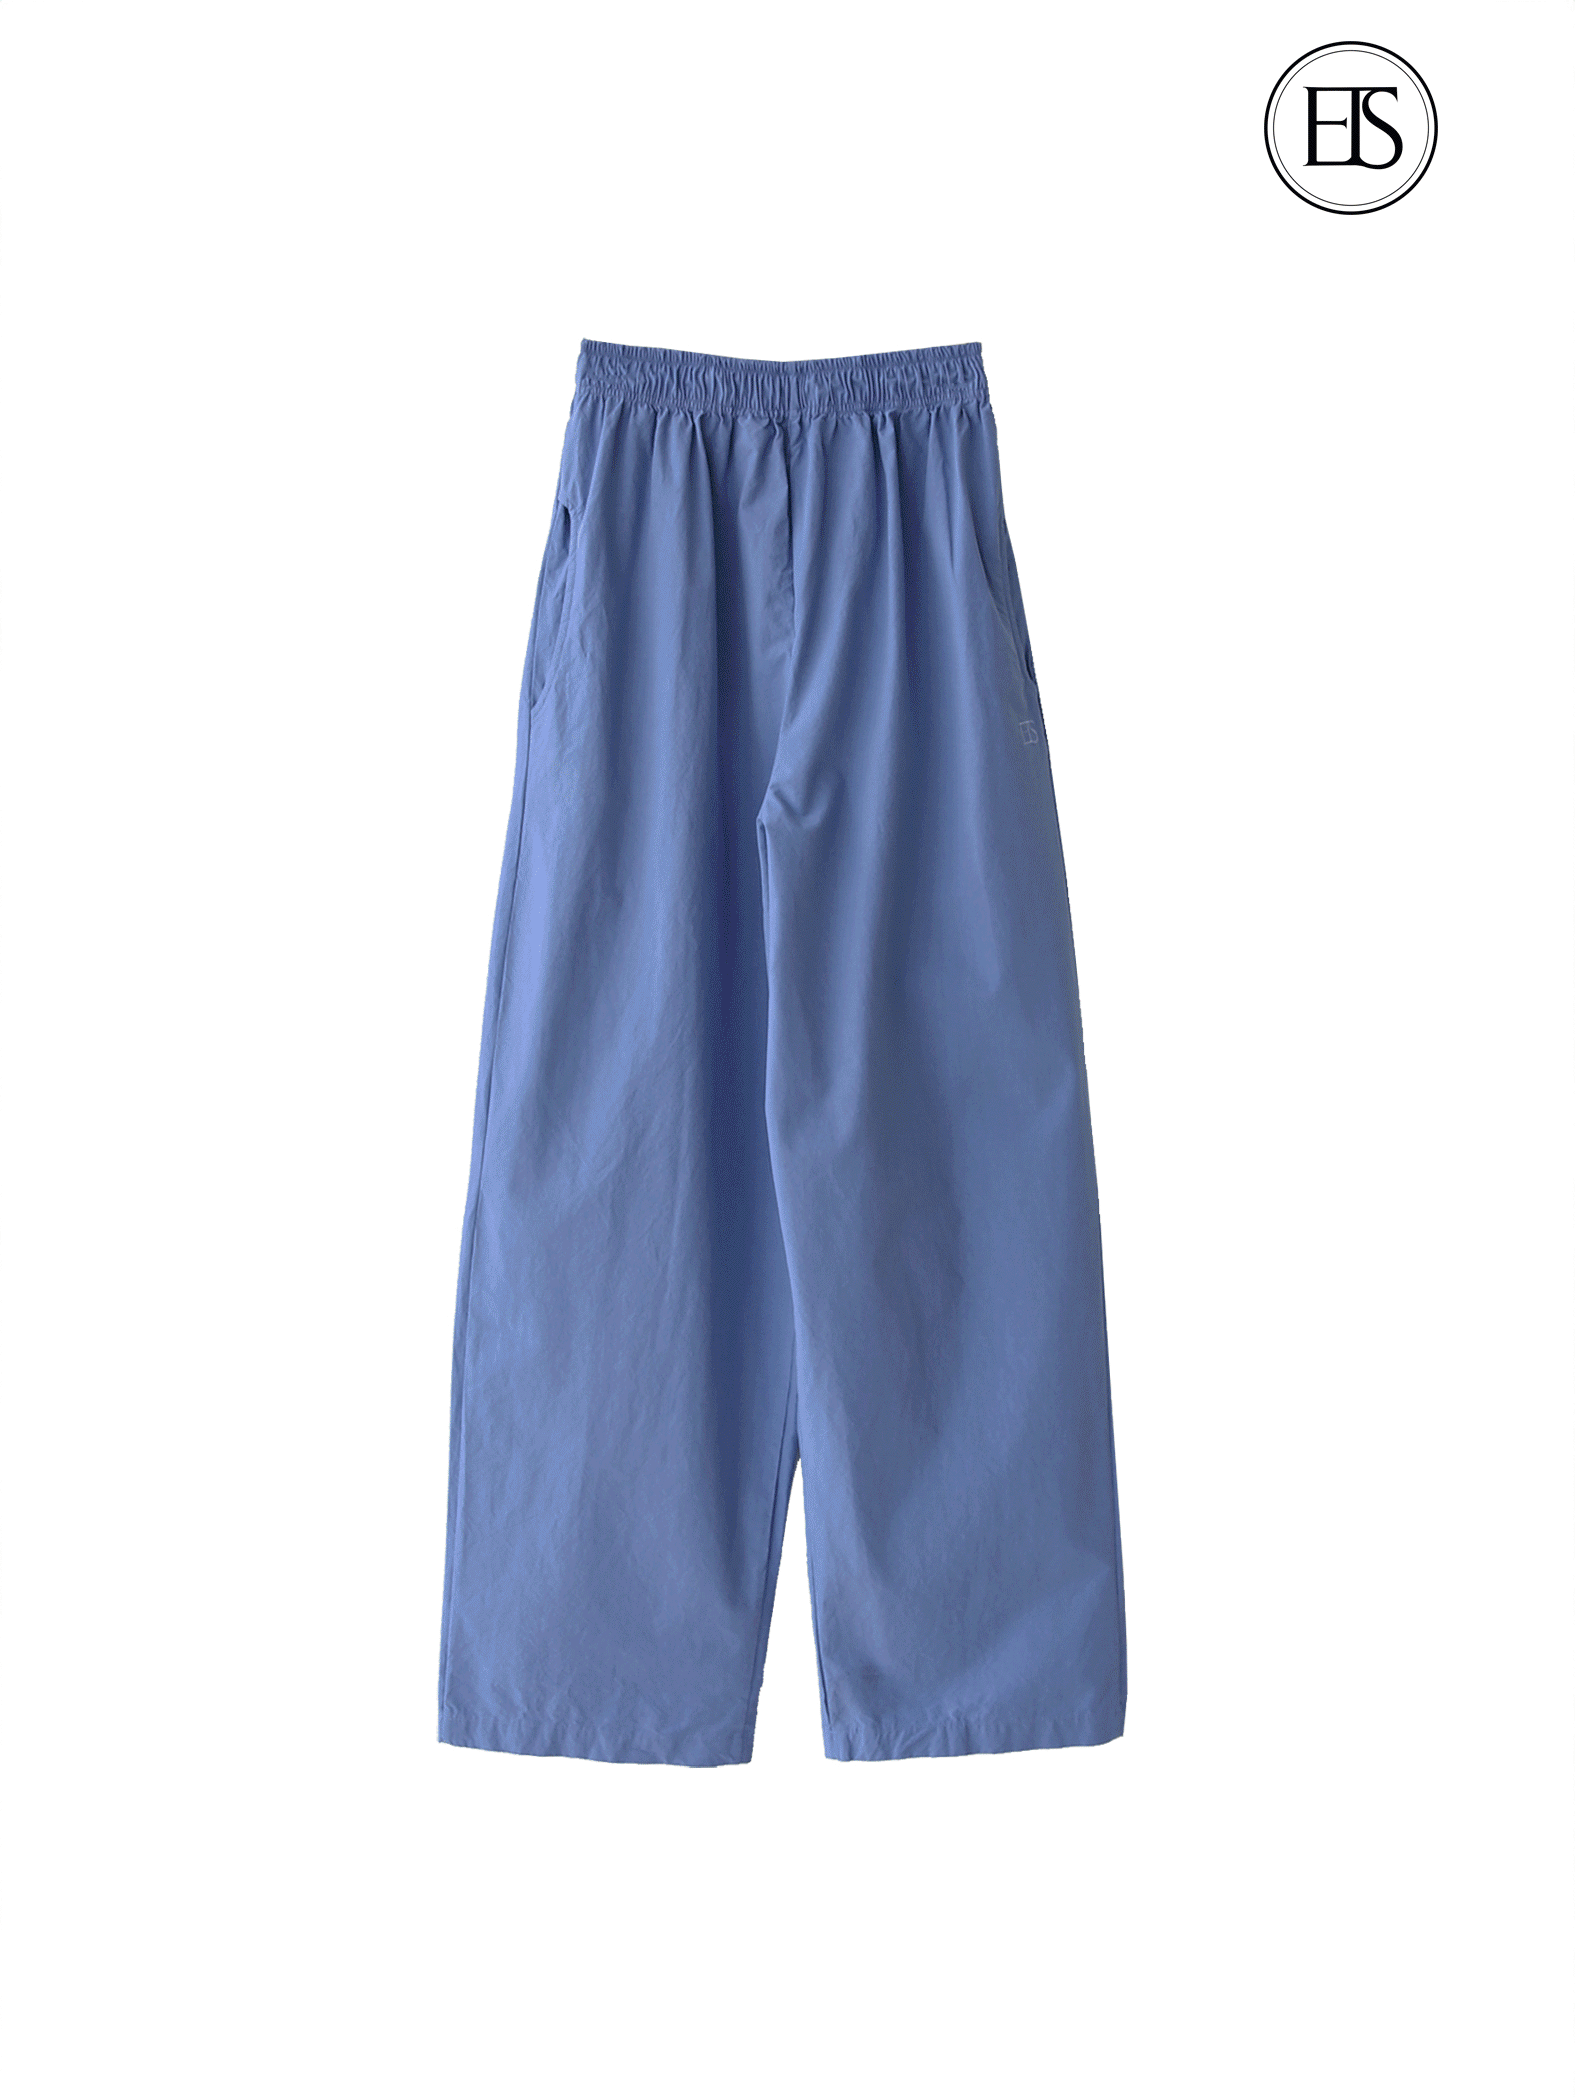 (MADE)ETS WASHING COTTON PANTS (3COLORS_BLUE)